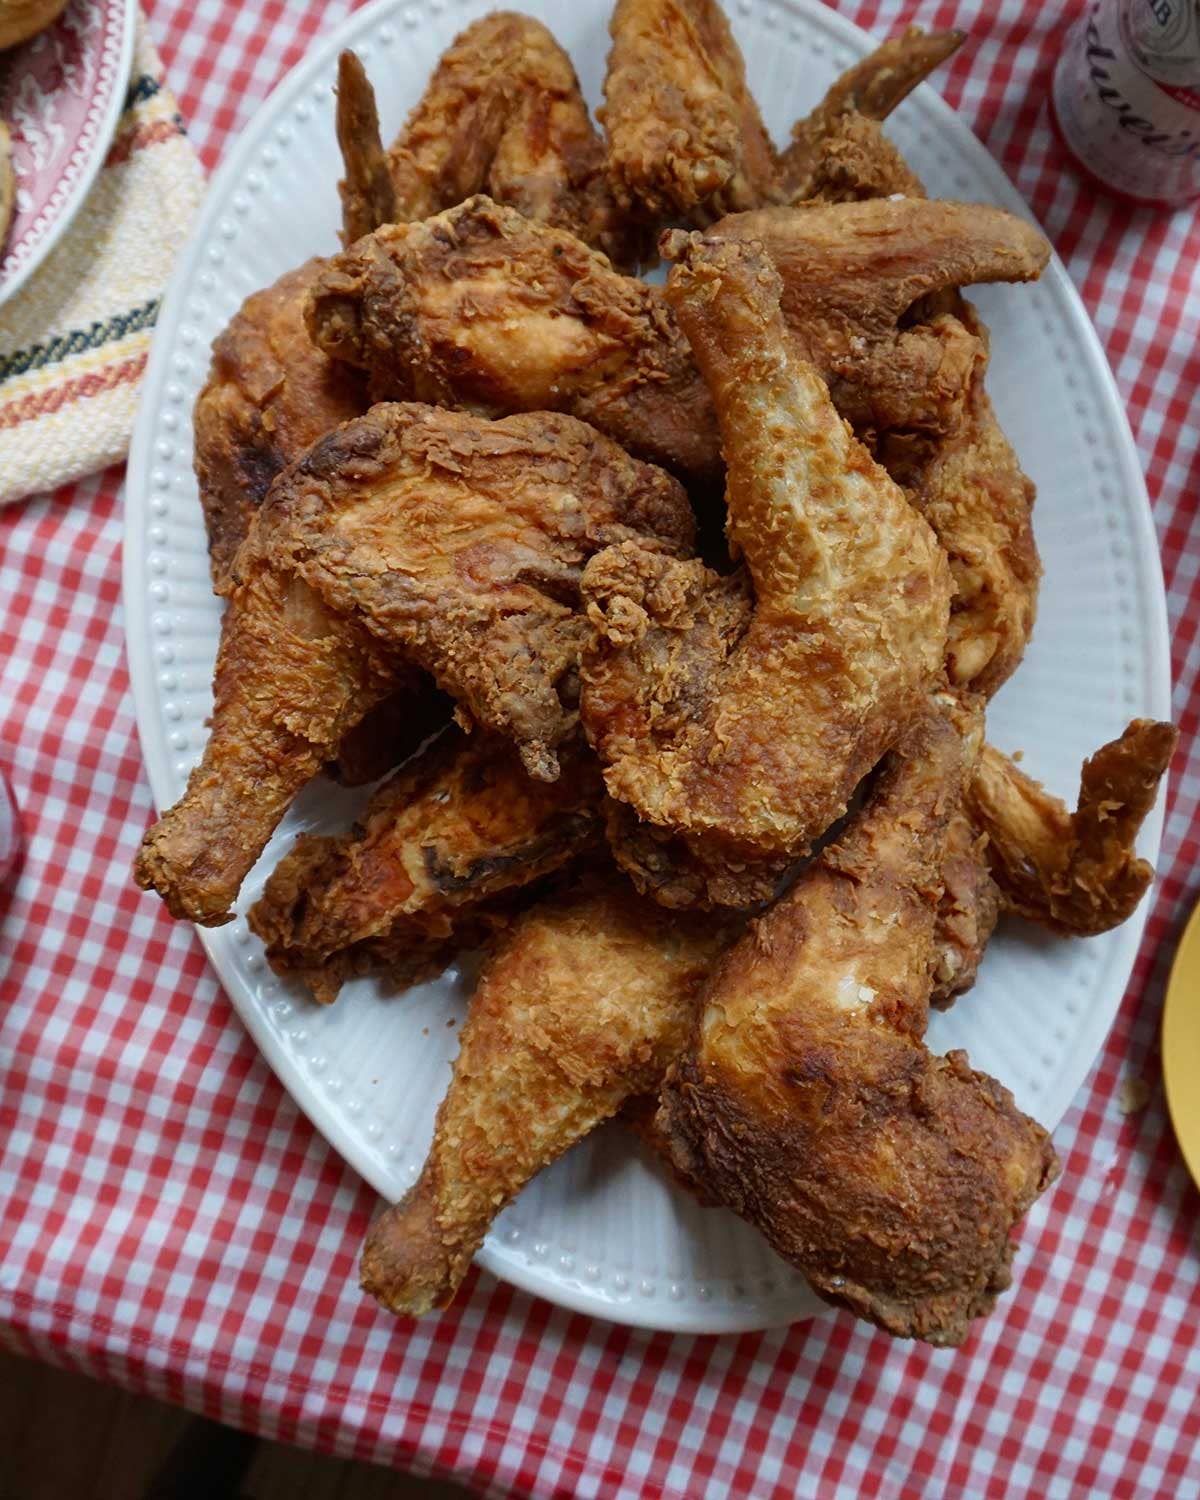 Our Readers’ Favorite Fried Chicken Recipe